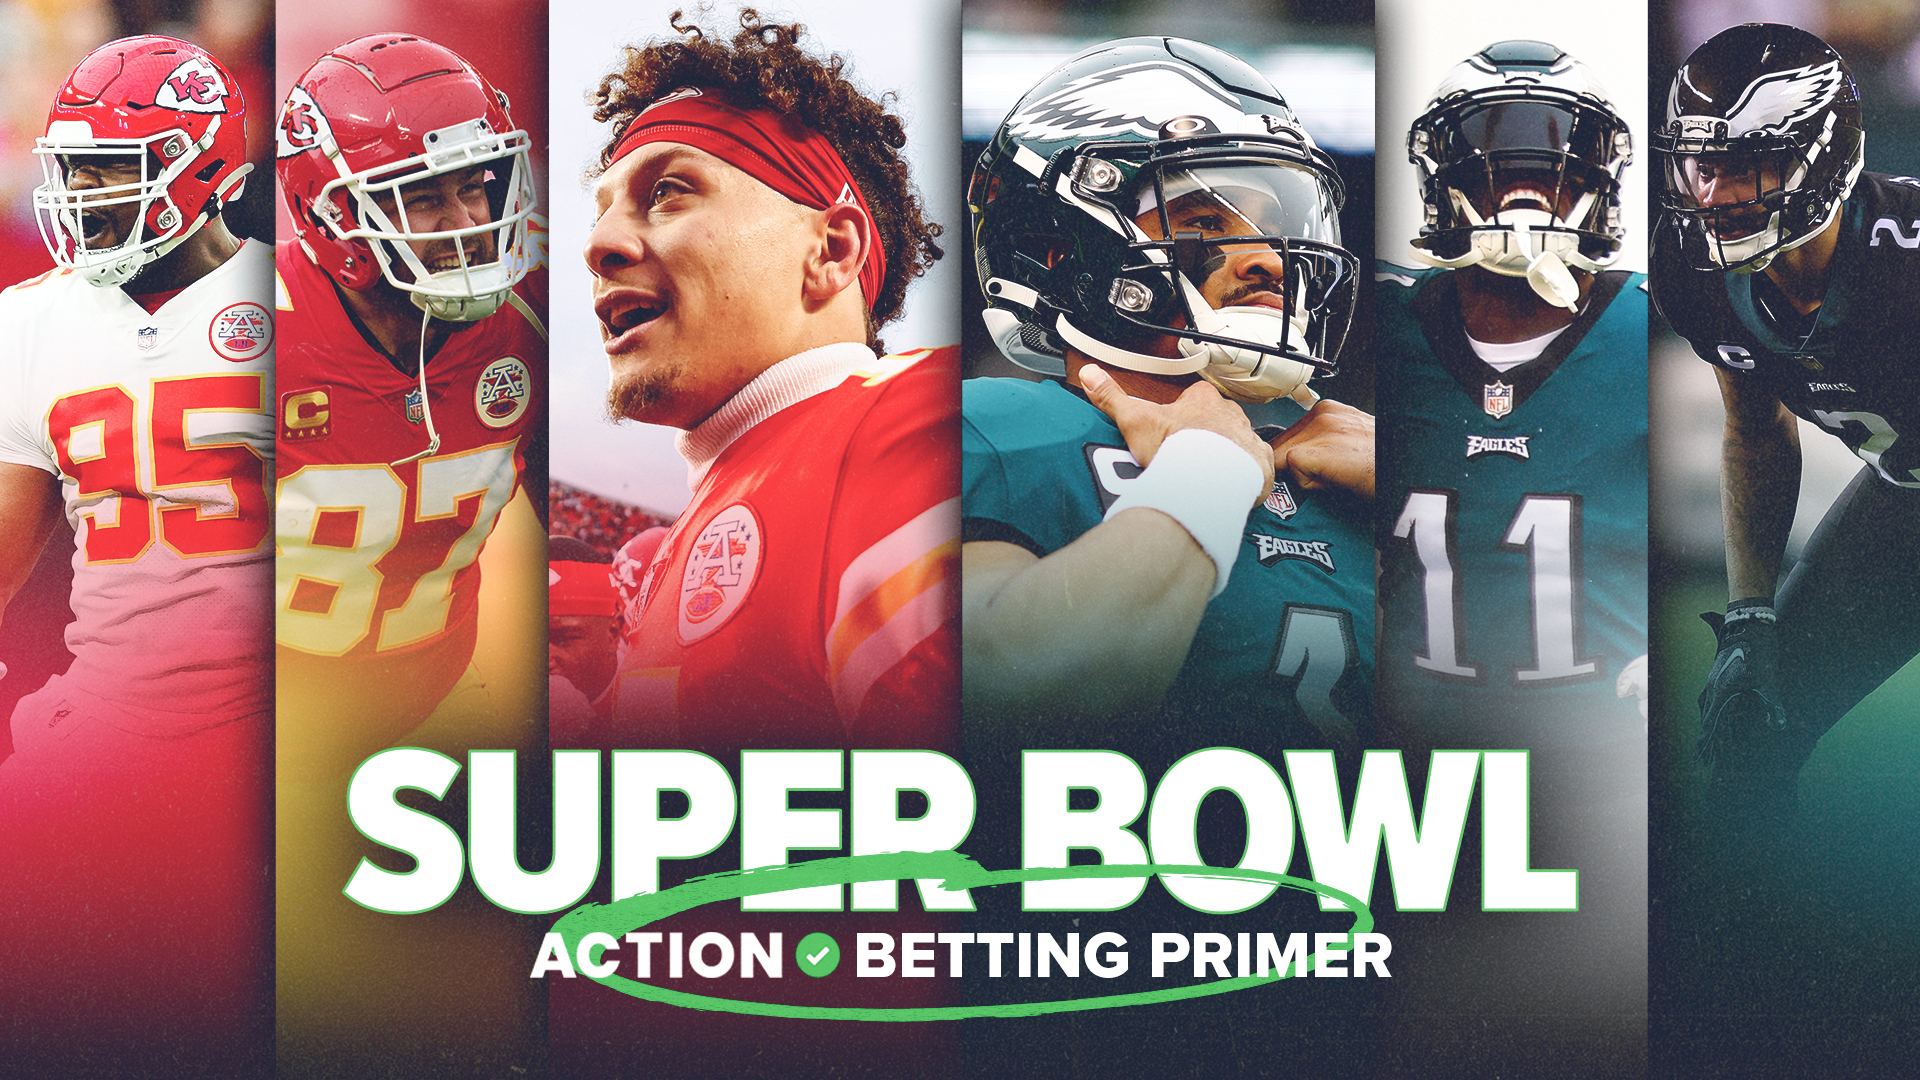 2022 Super Bowl odds: Here are the early lines for all 32 NFL